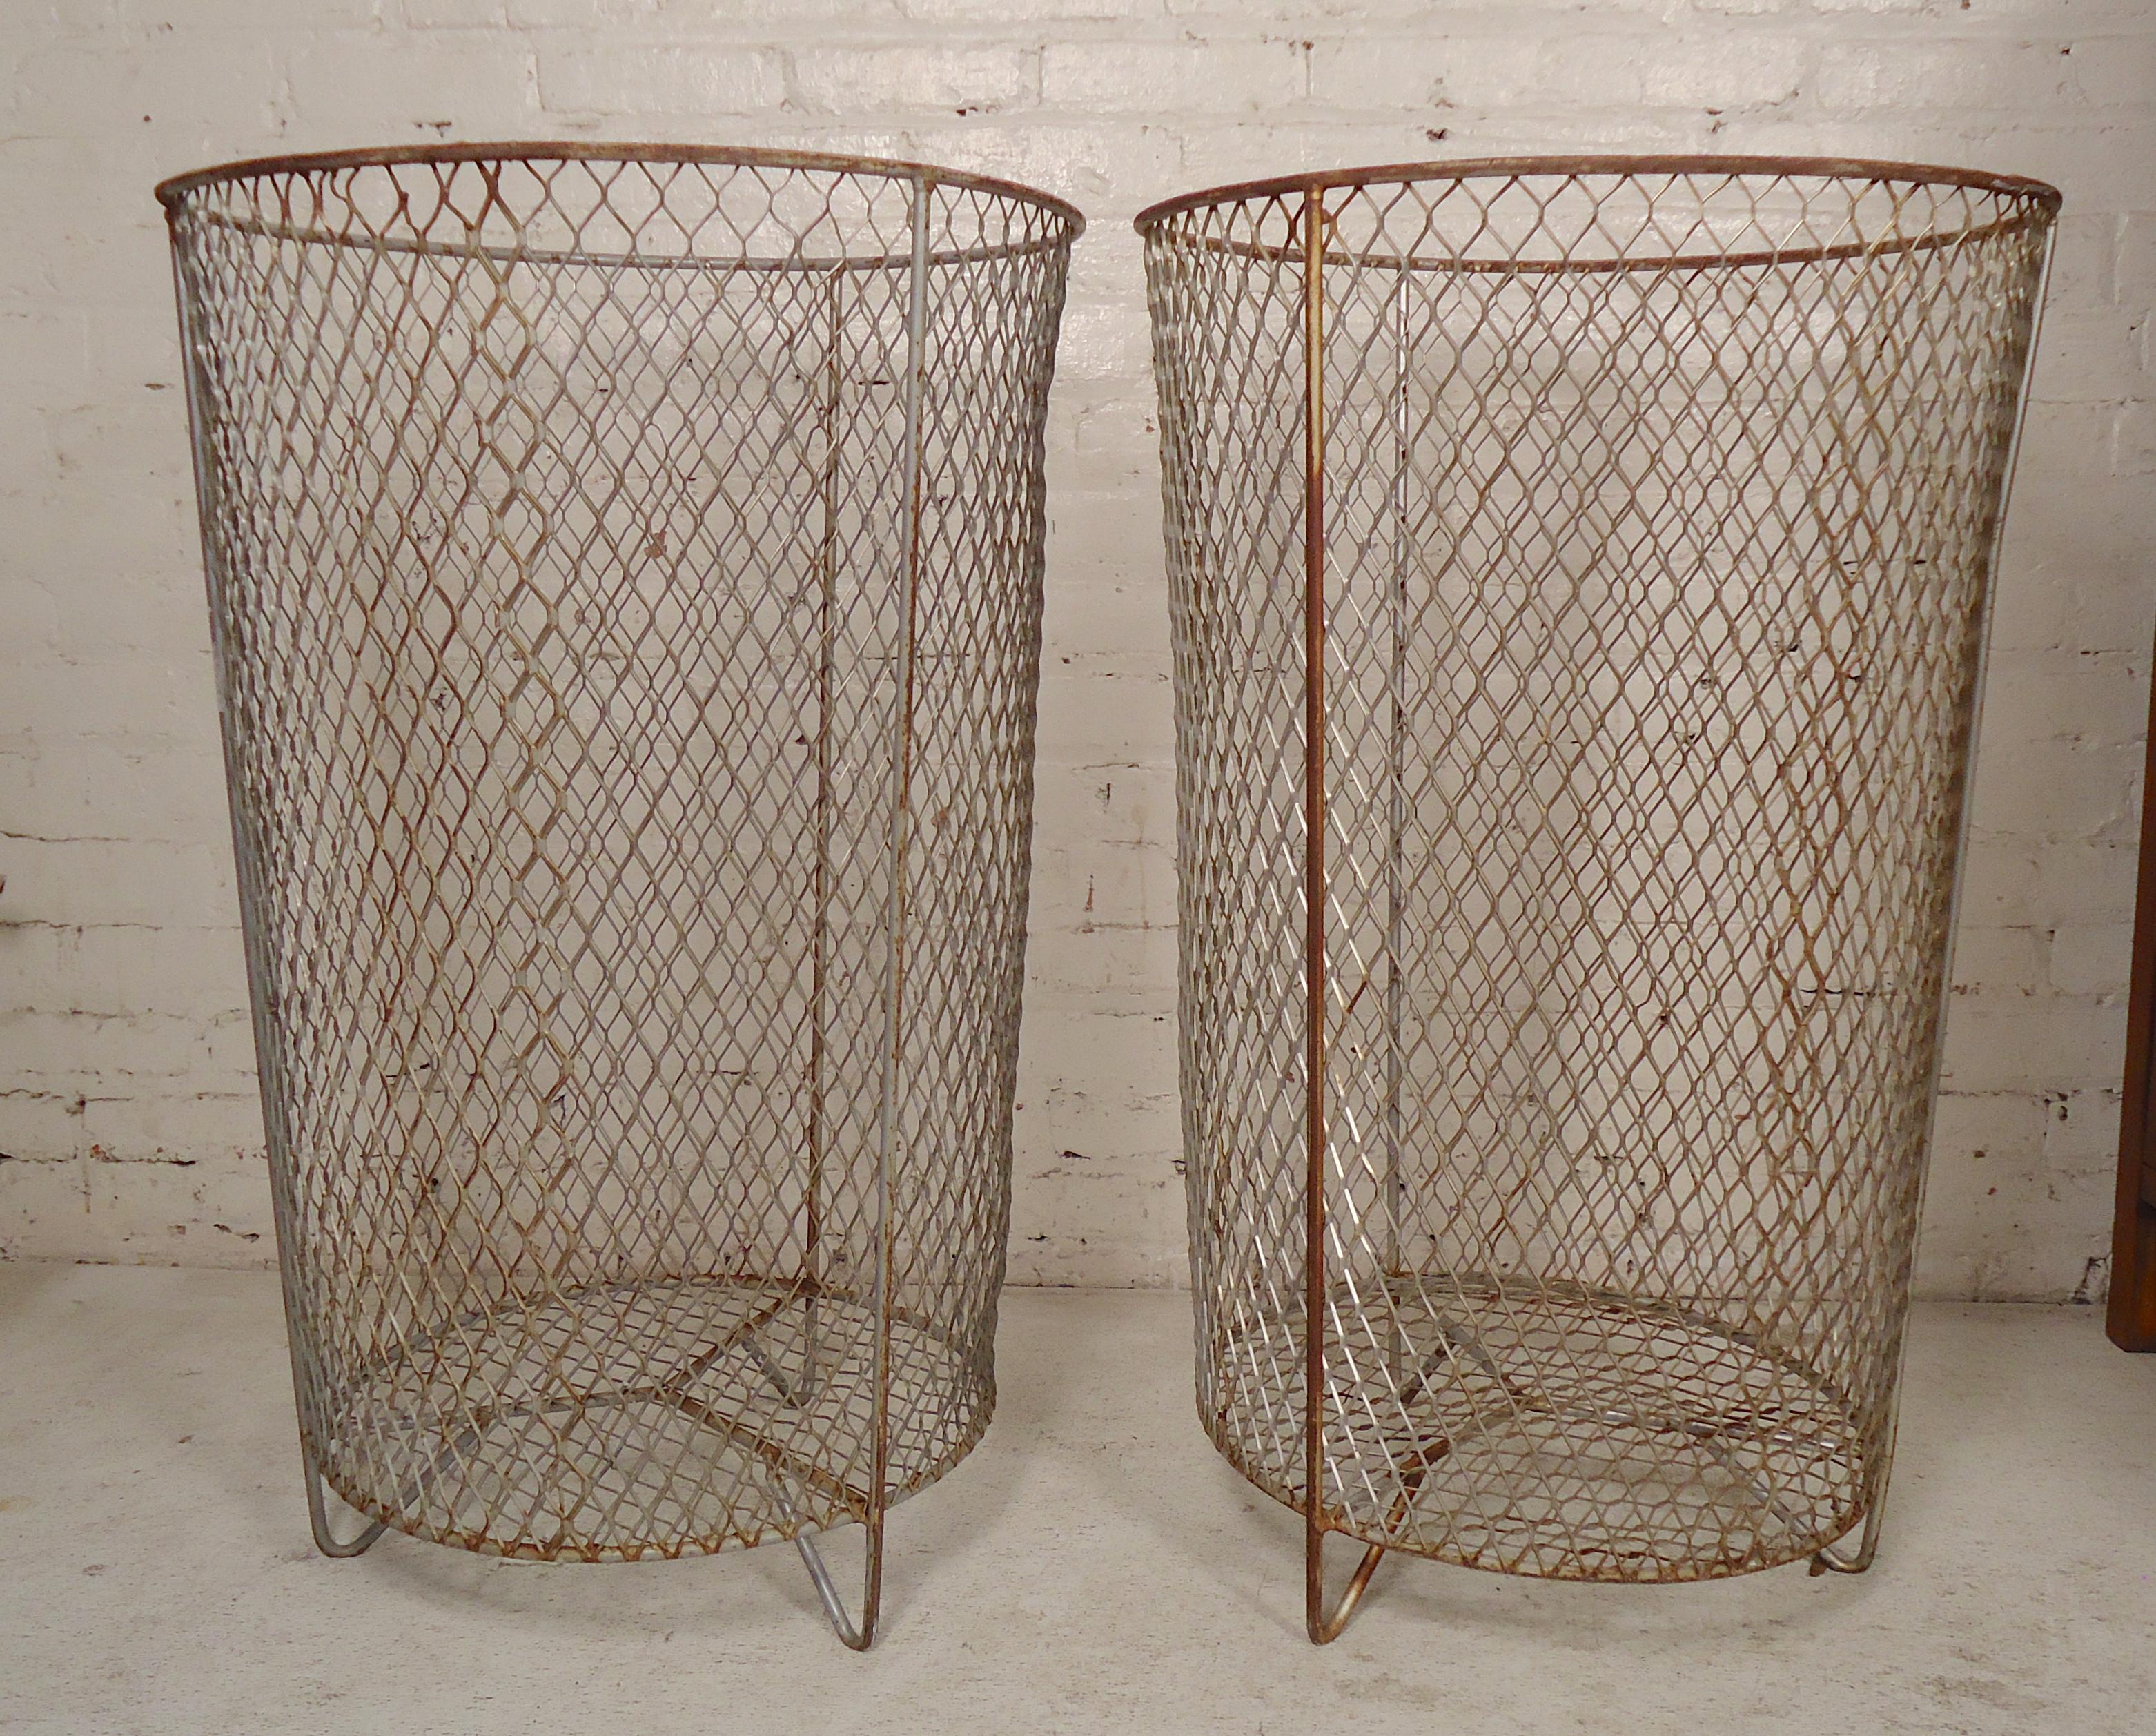 Single mesh metal waste basket. Two available.
(Please confirm item location - NY or NJ - with dealer).
  